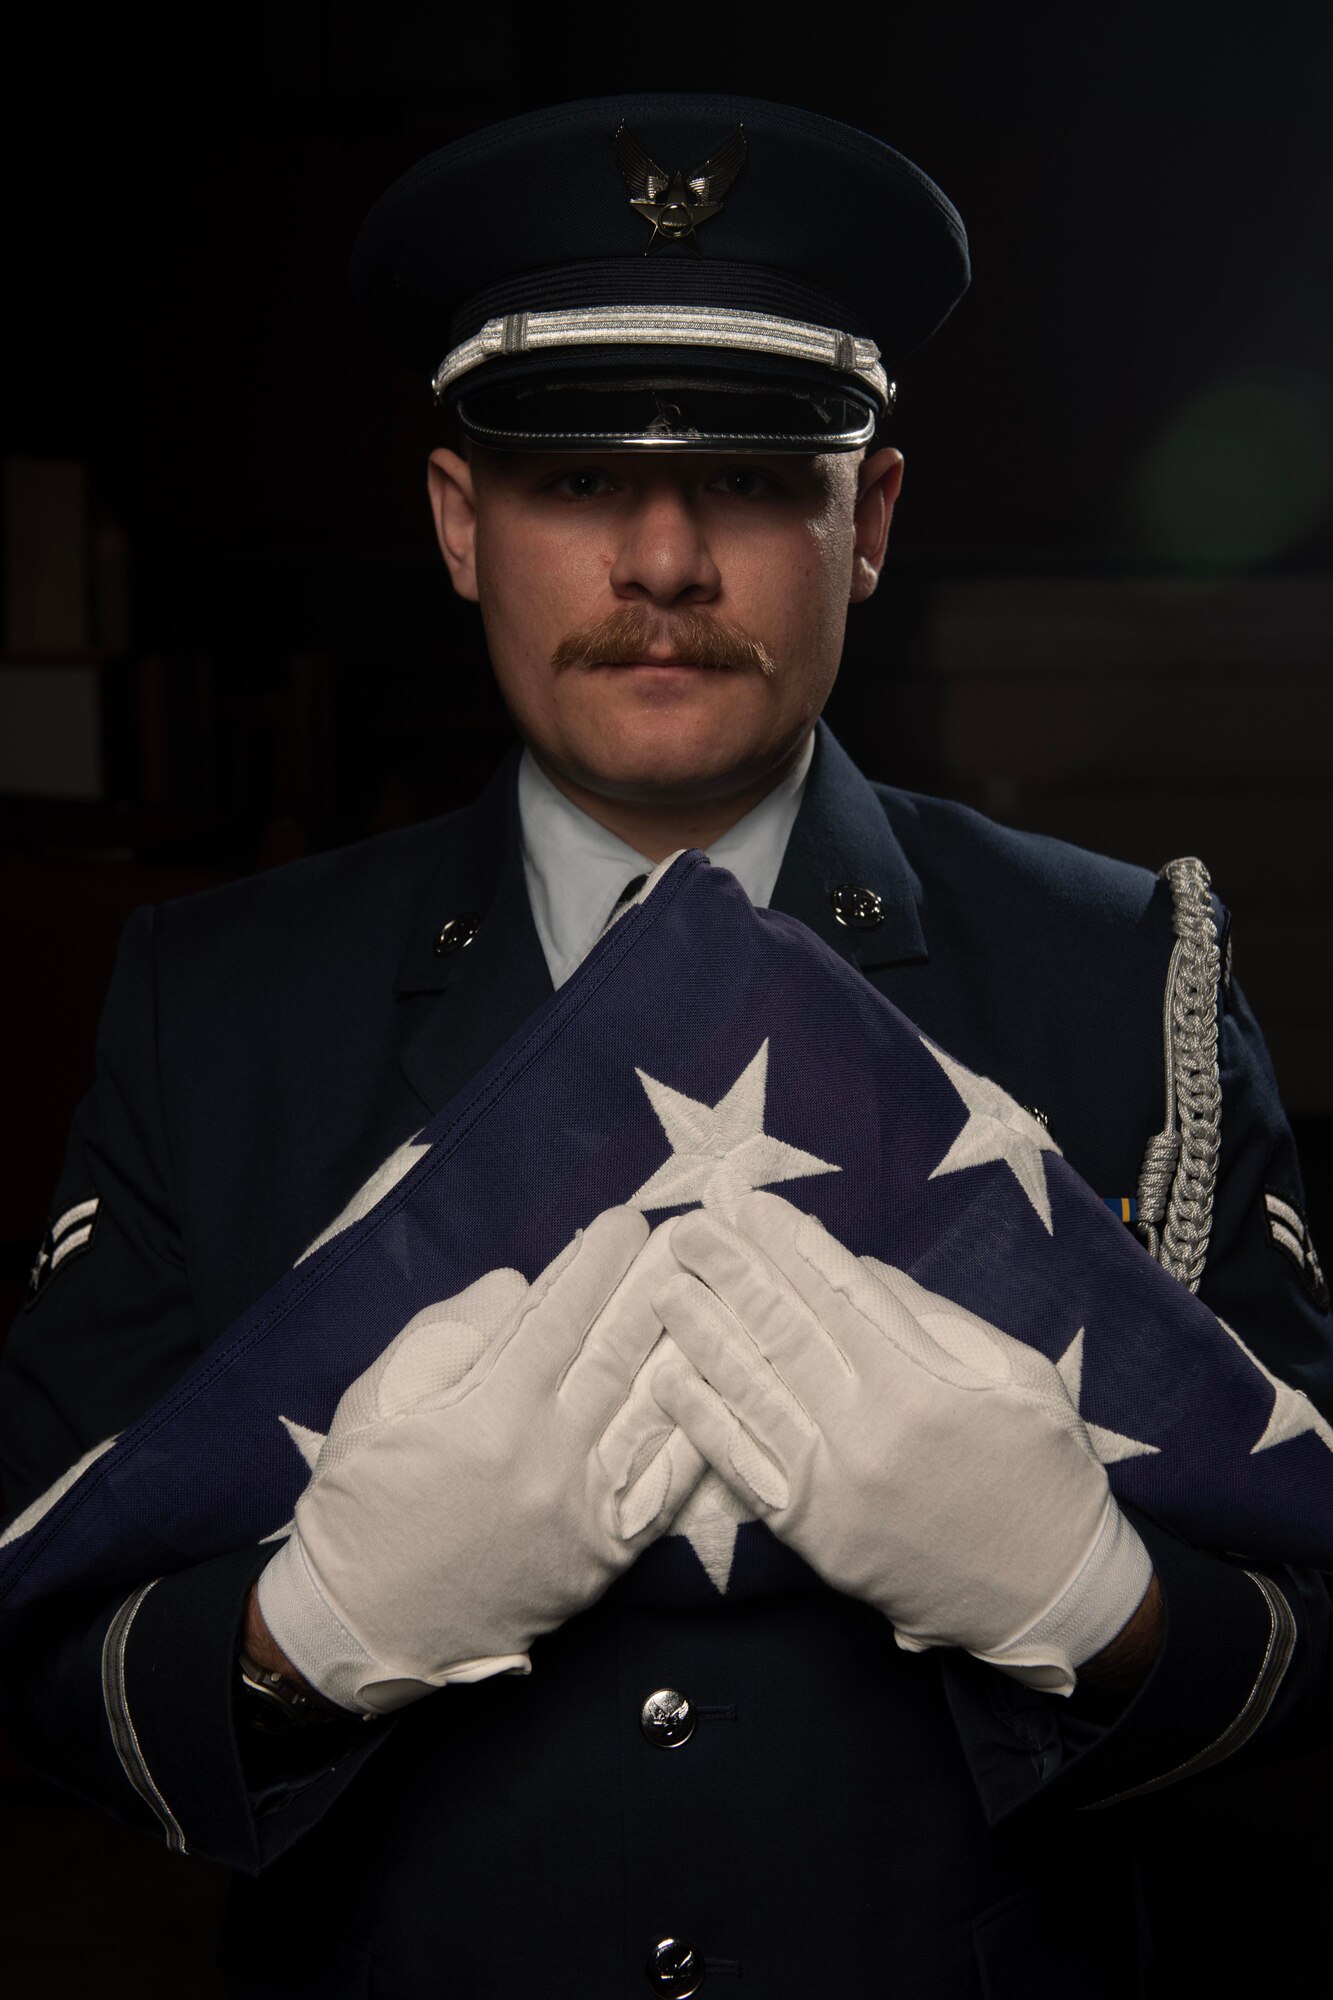 U.S. Air Force Airman 1st Class Jacob Cressy, 9th Reconnaissance Wing honor guardsman, holds the U.S. Flag, May 16, 2023, at Beale Air Force Base, California.